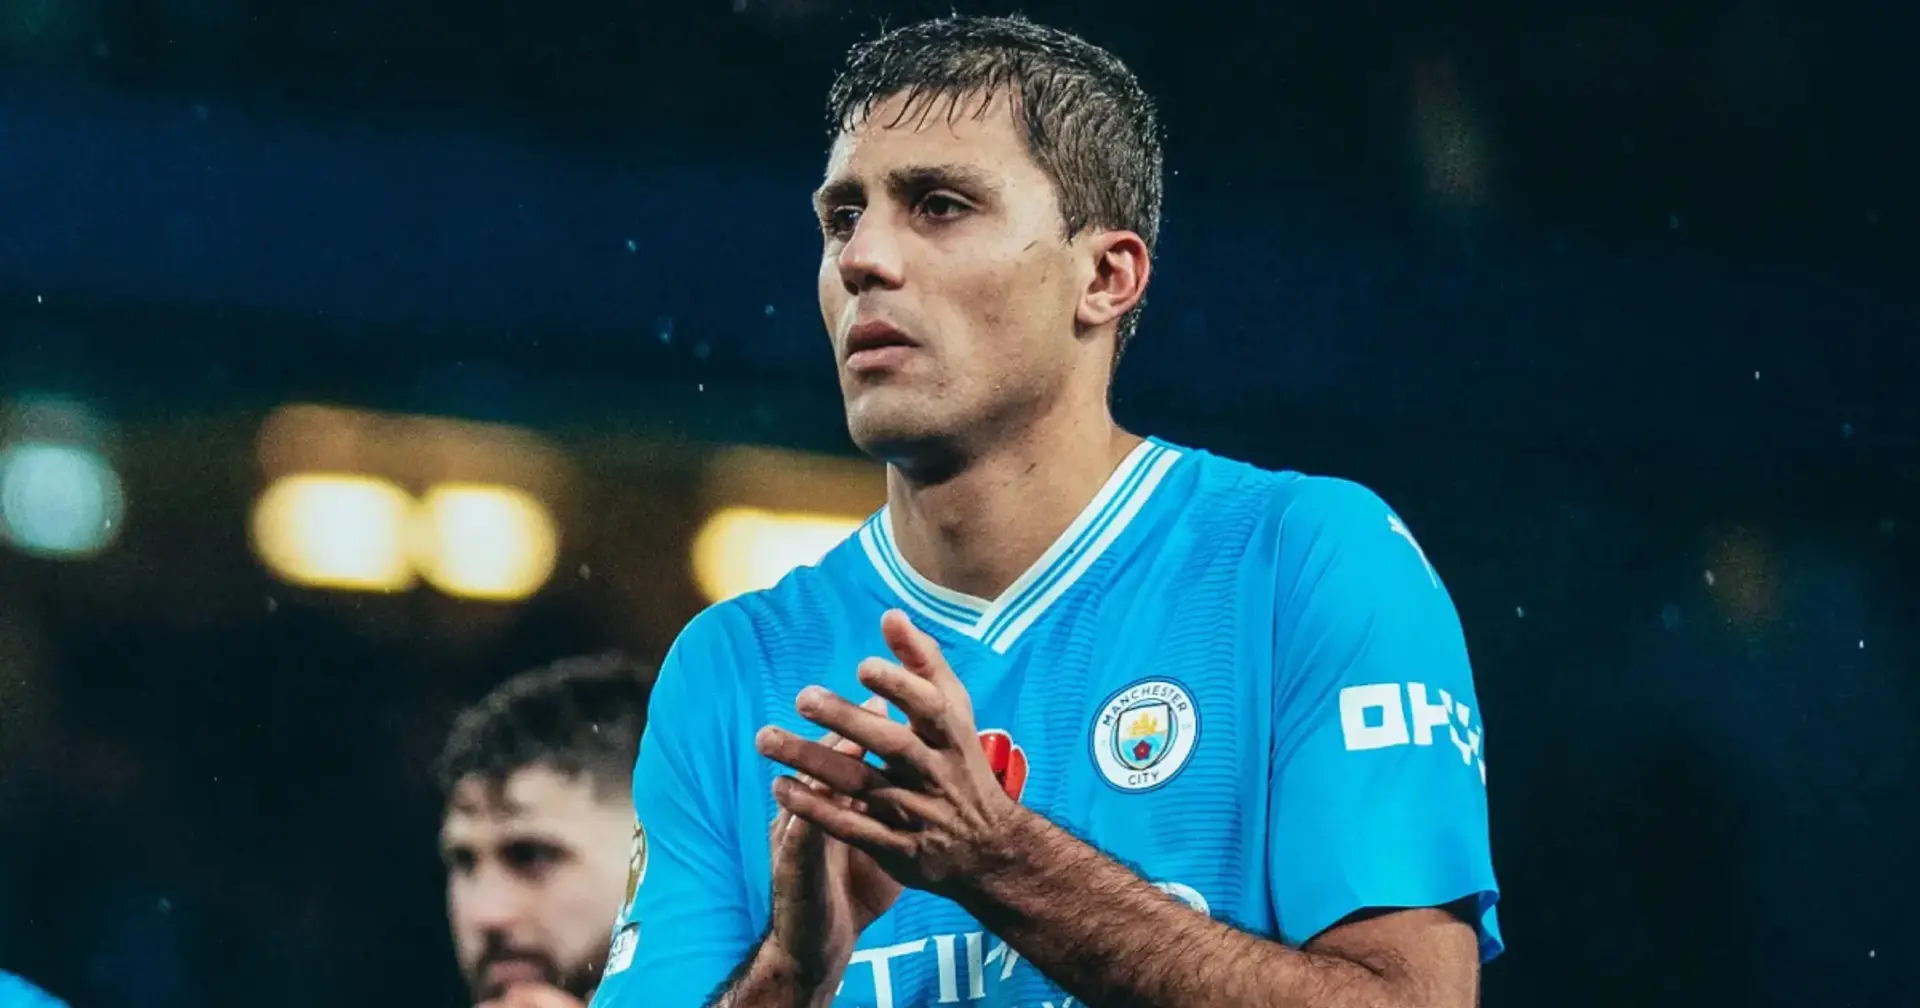 Man City face Rodri injury blow ahead of Liverpool game - they lost every game without him this season